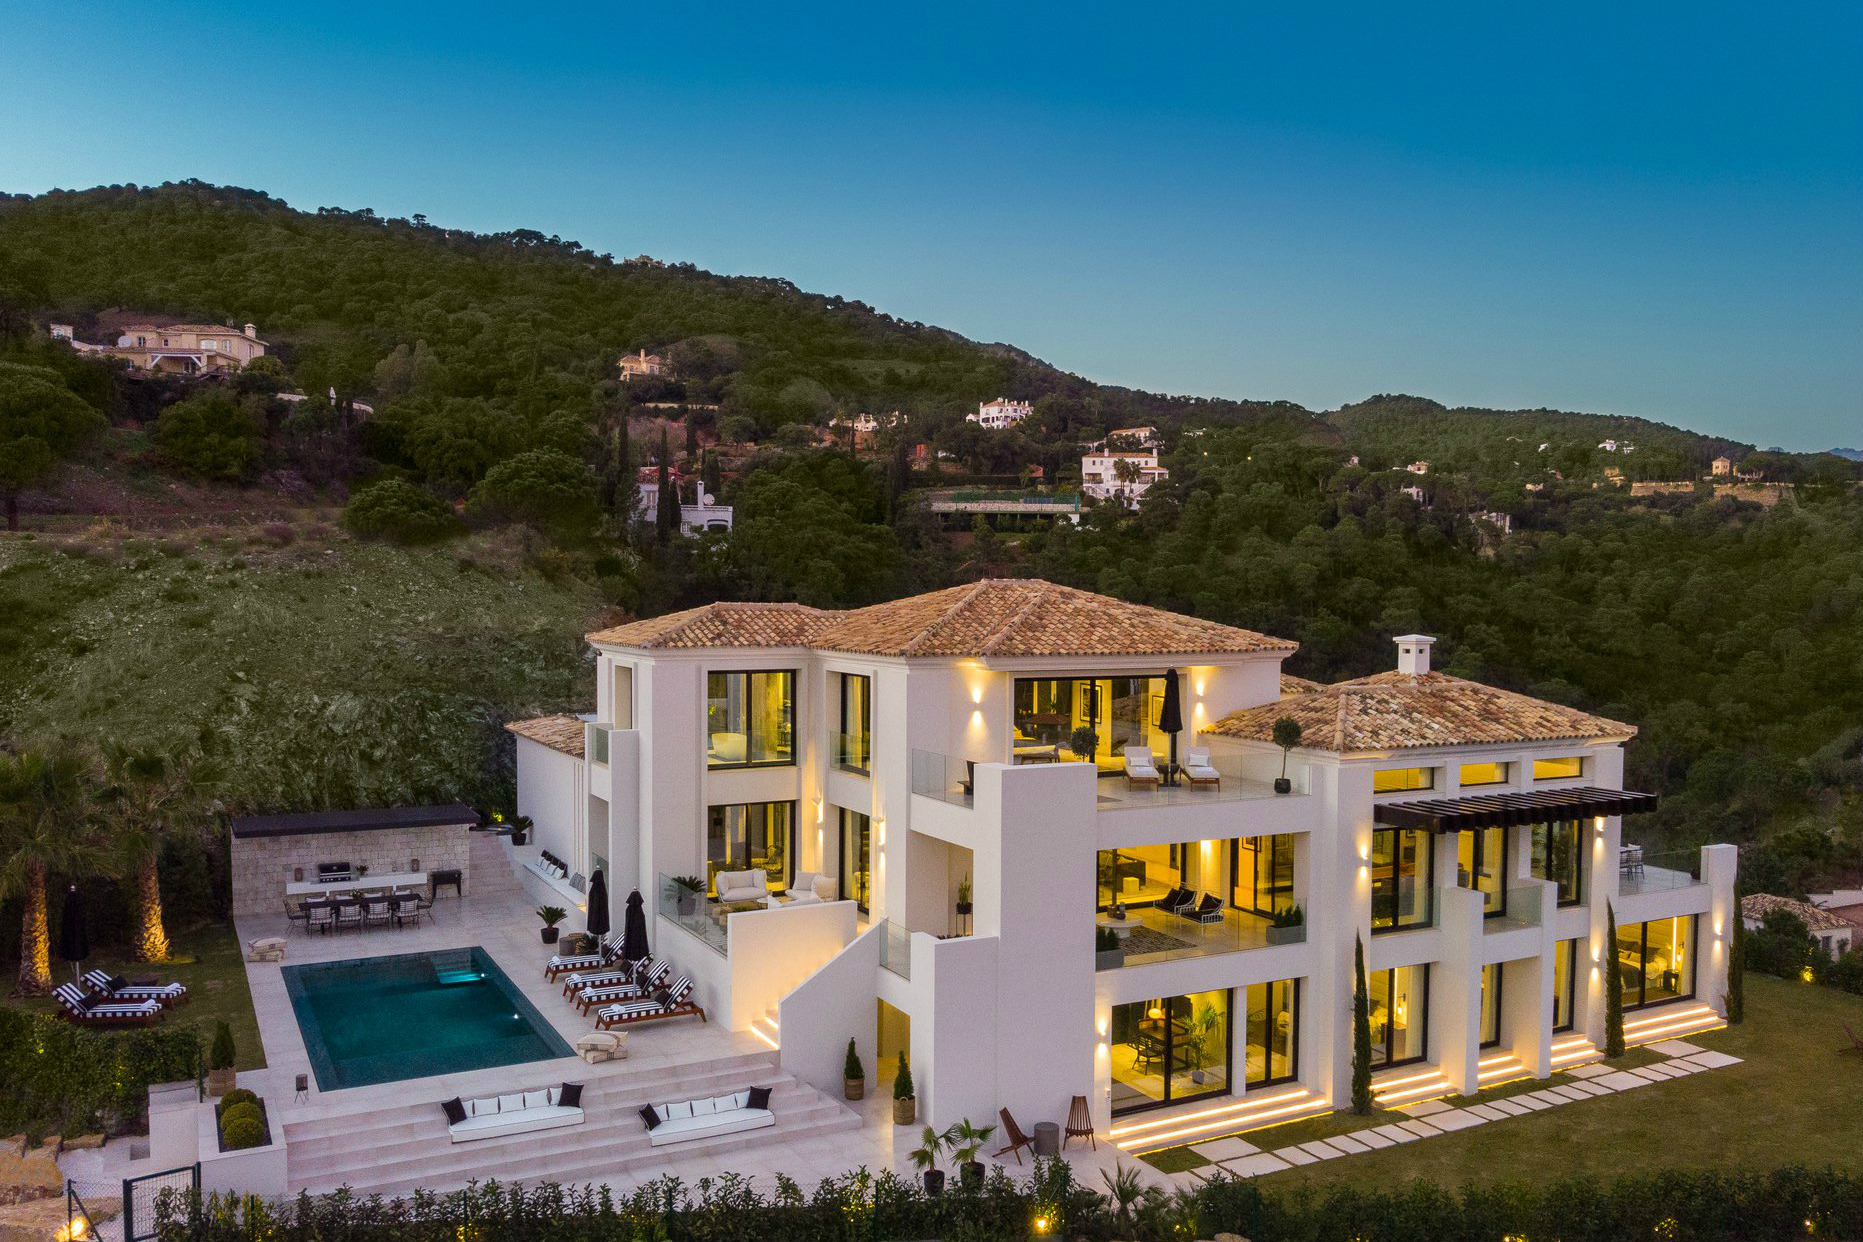 Add to favorites: Insider’s guide to luxury property in Spain